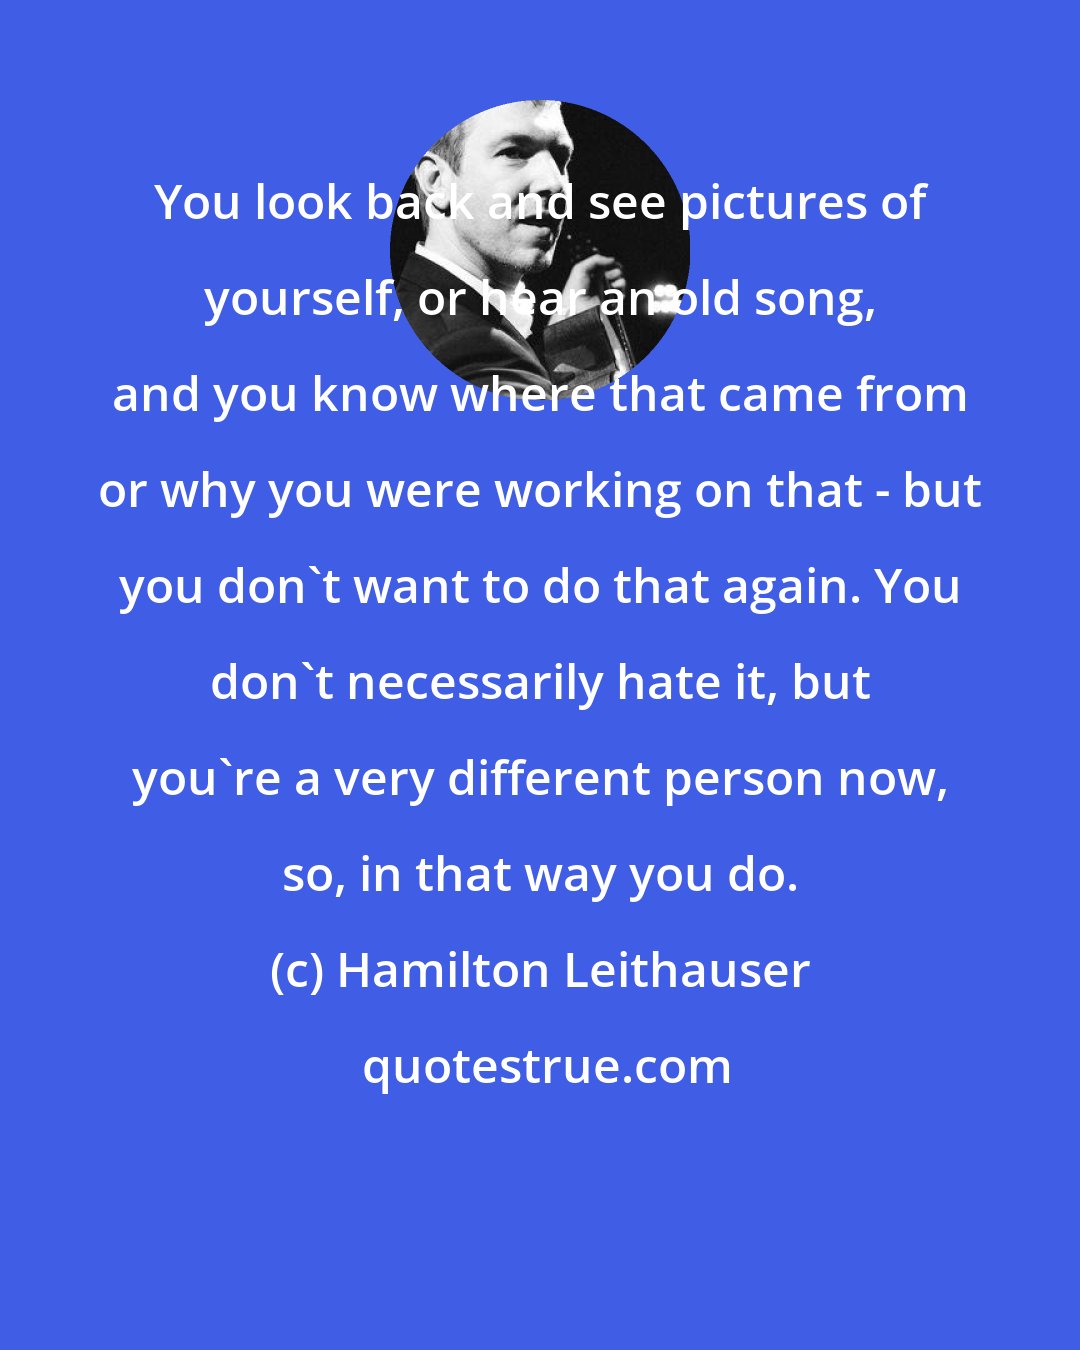 Hamilton Leithauser: You look back and see pictures of yourself, or hear an old song, and you know where that came from or why you were working on that - but you don't want to do that again. You don't necessarily hate it, but you're a very different person now, so, in that way you do.